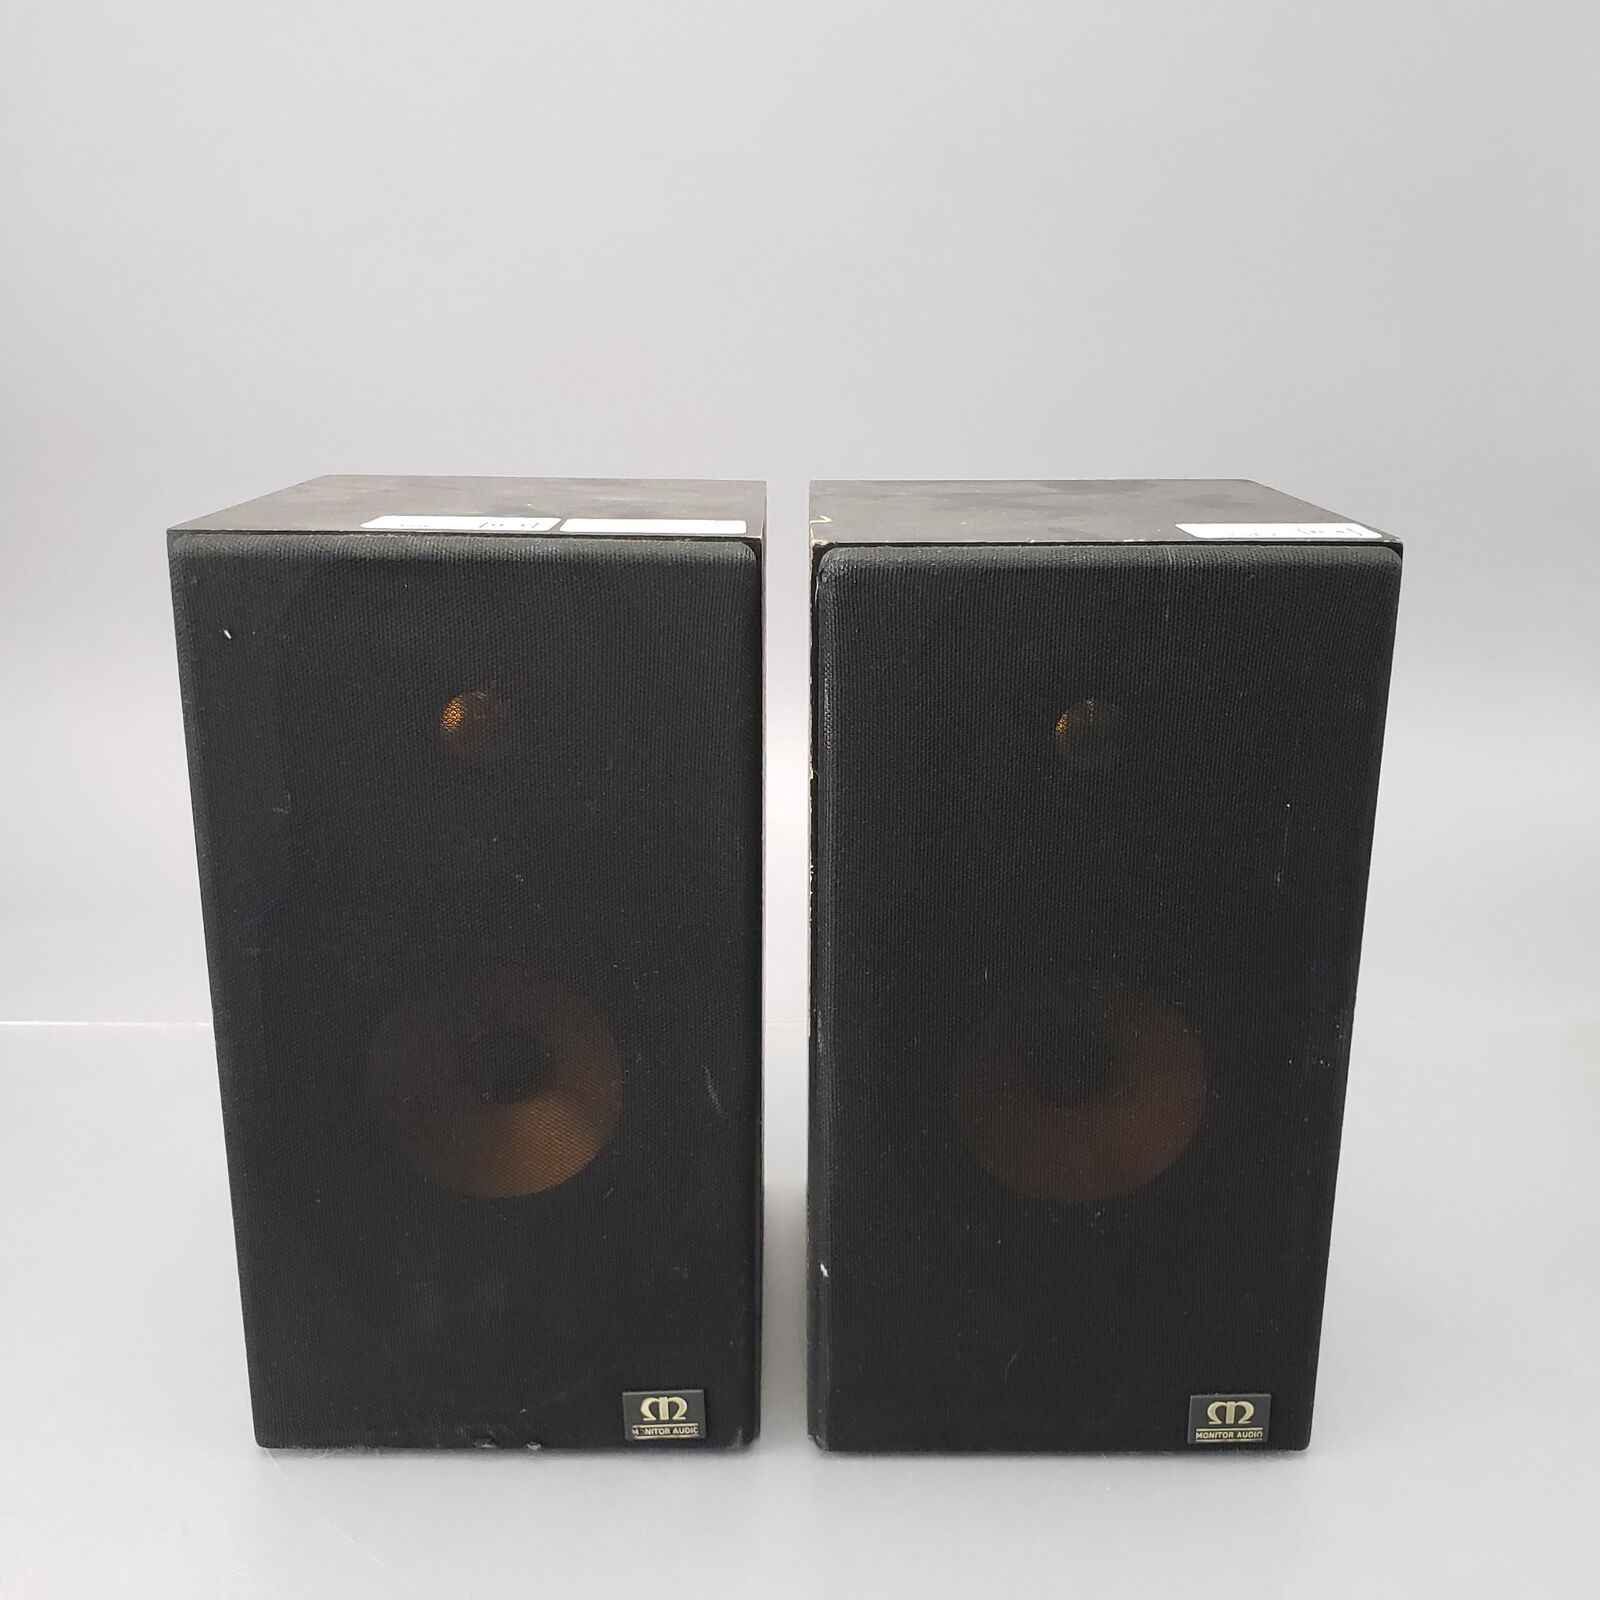 Monitor Audio MAG 901 Dual Speakers - Tested